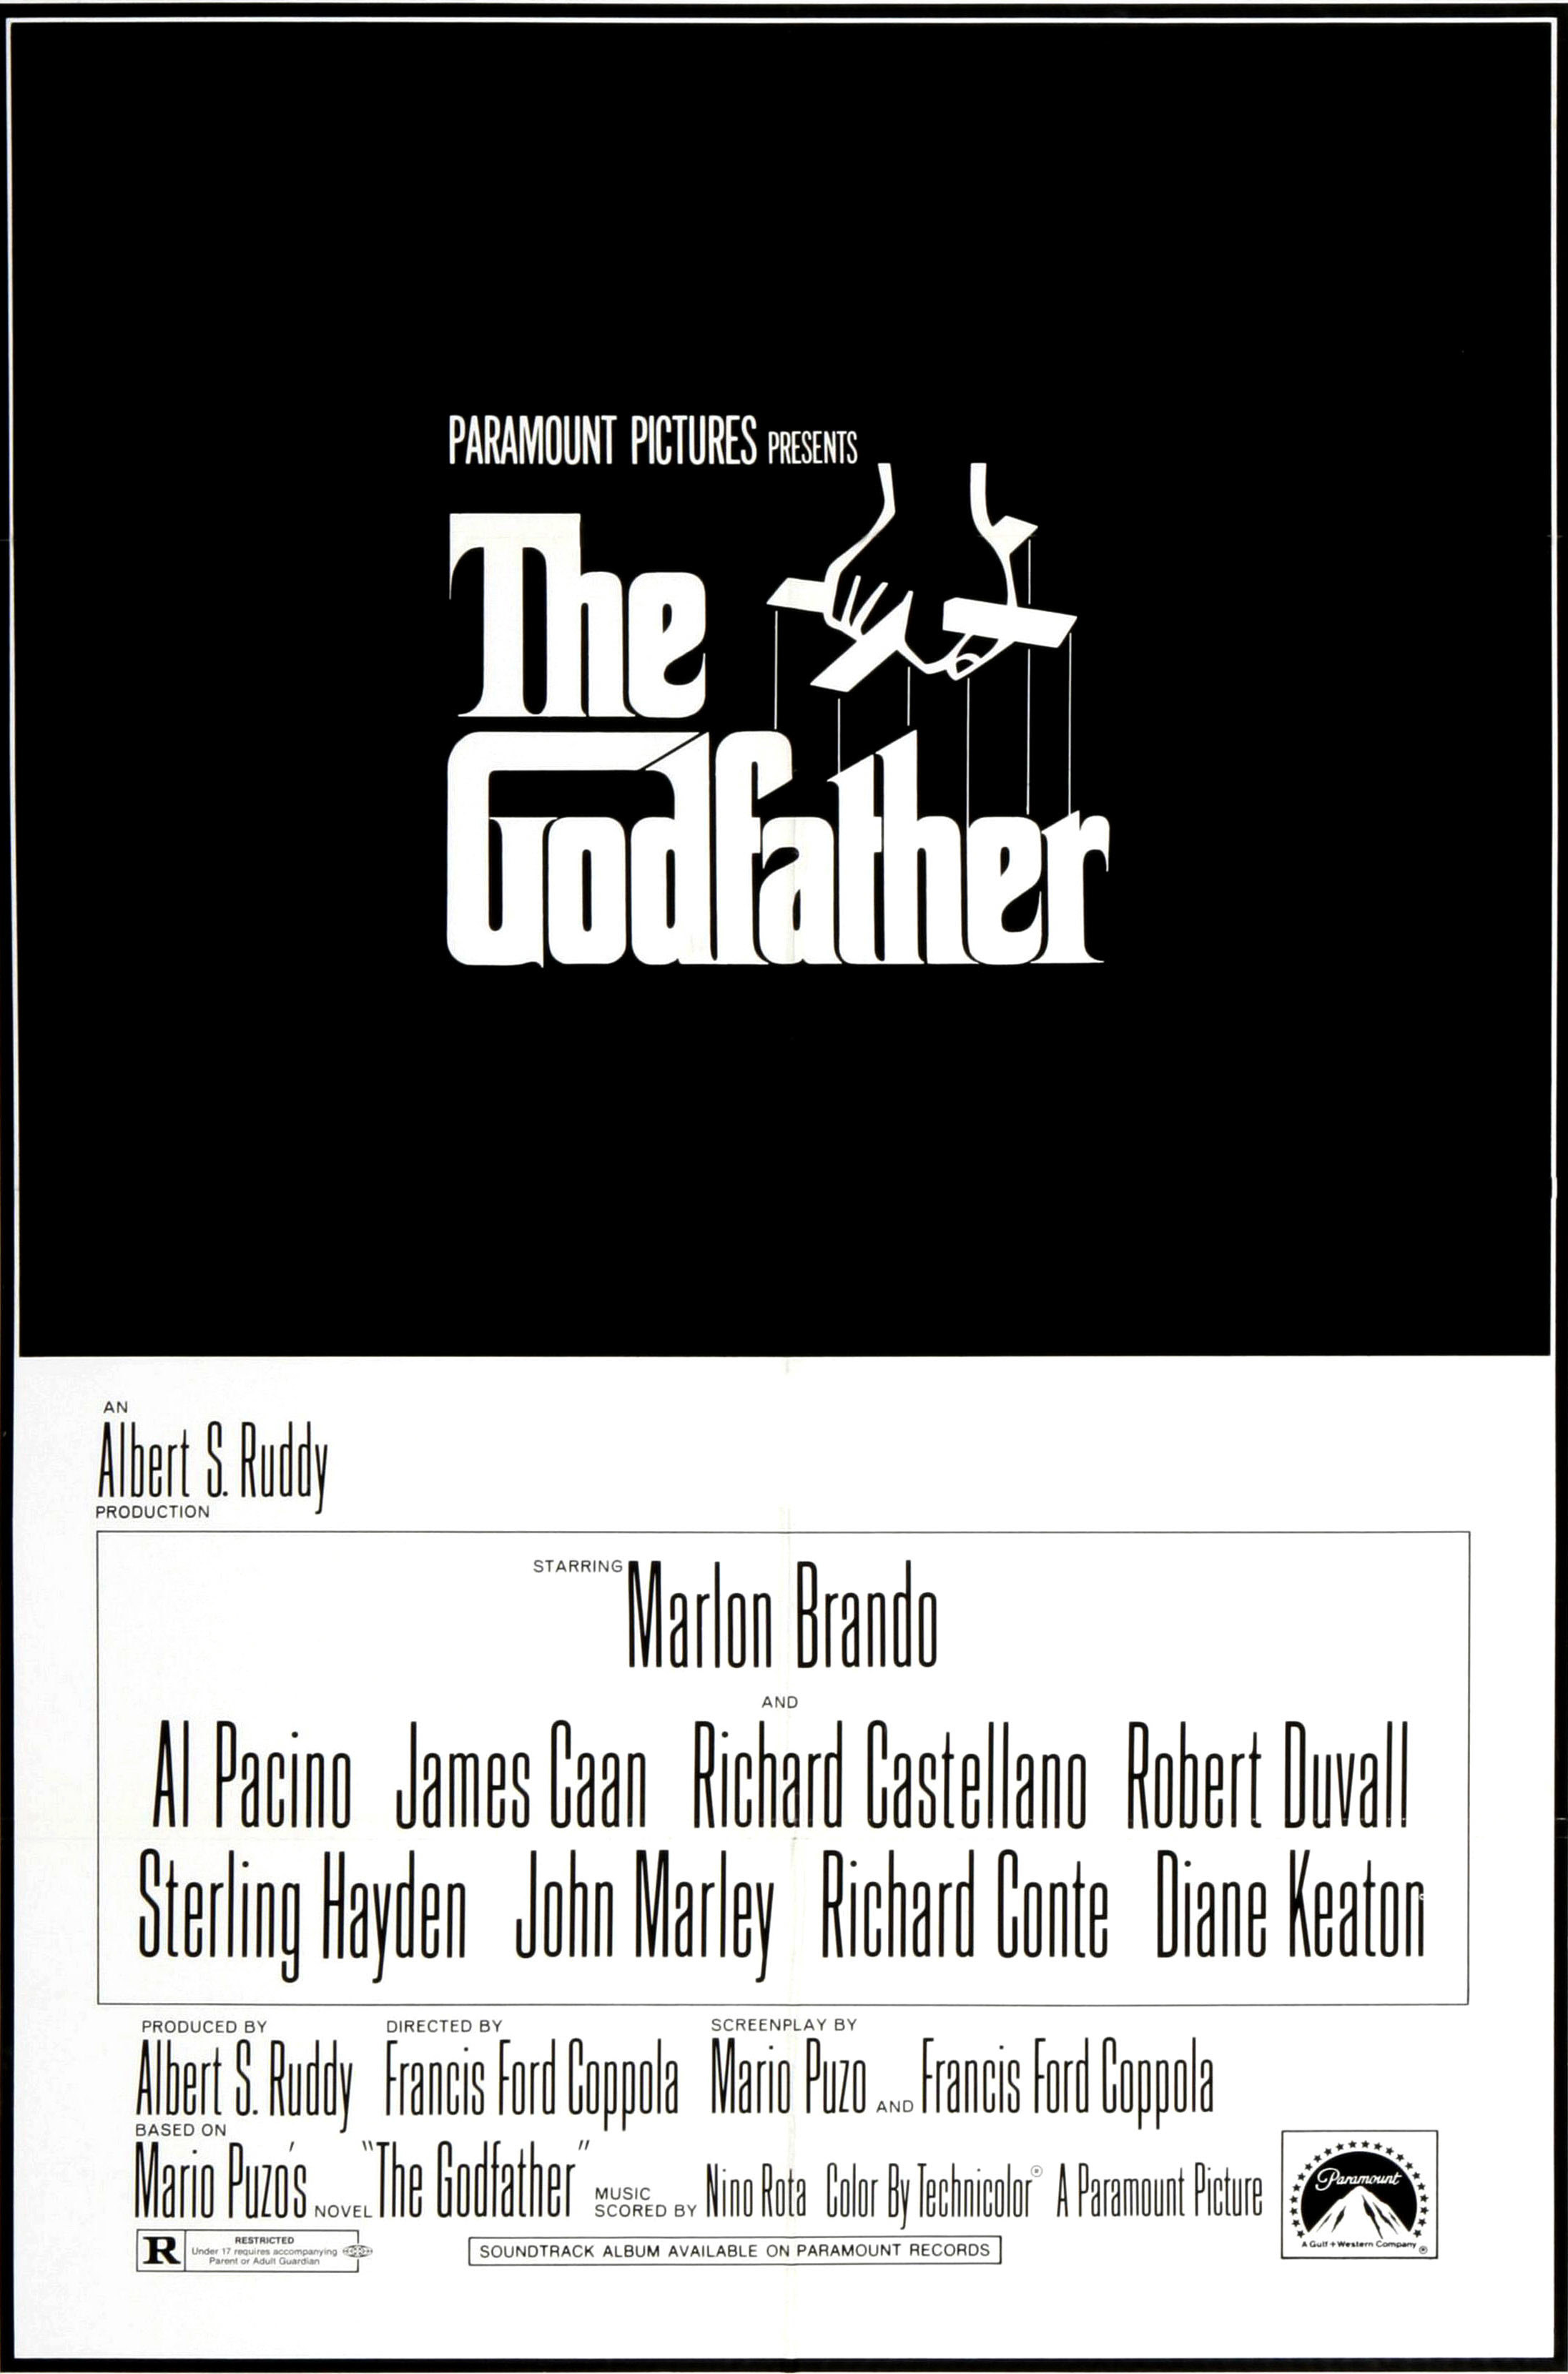 The theatrical poster for &quot;The Godfather&quot;